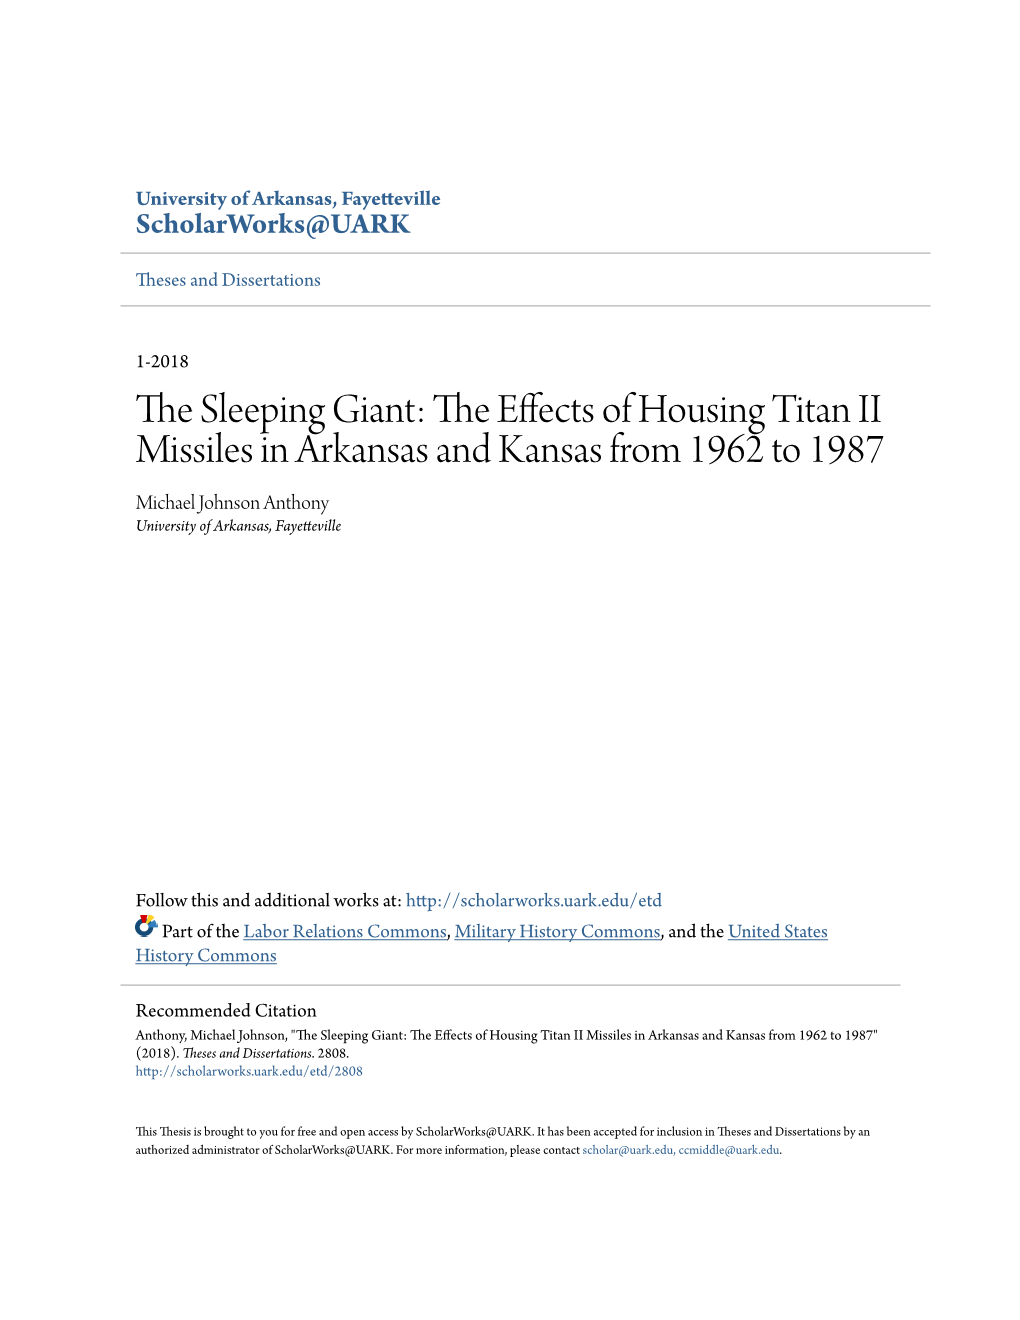 The Effects of Housing Titan II Missiles in Arkansas and Kansas from 1962 to 1987" (2018)